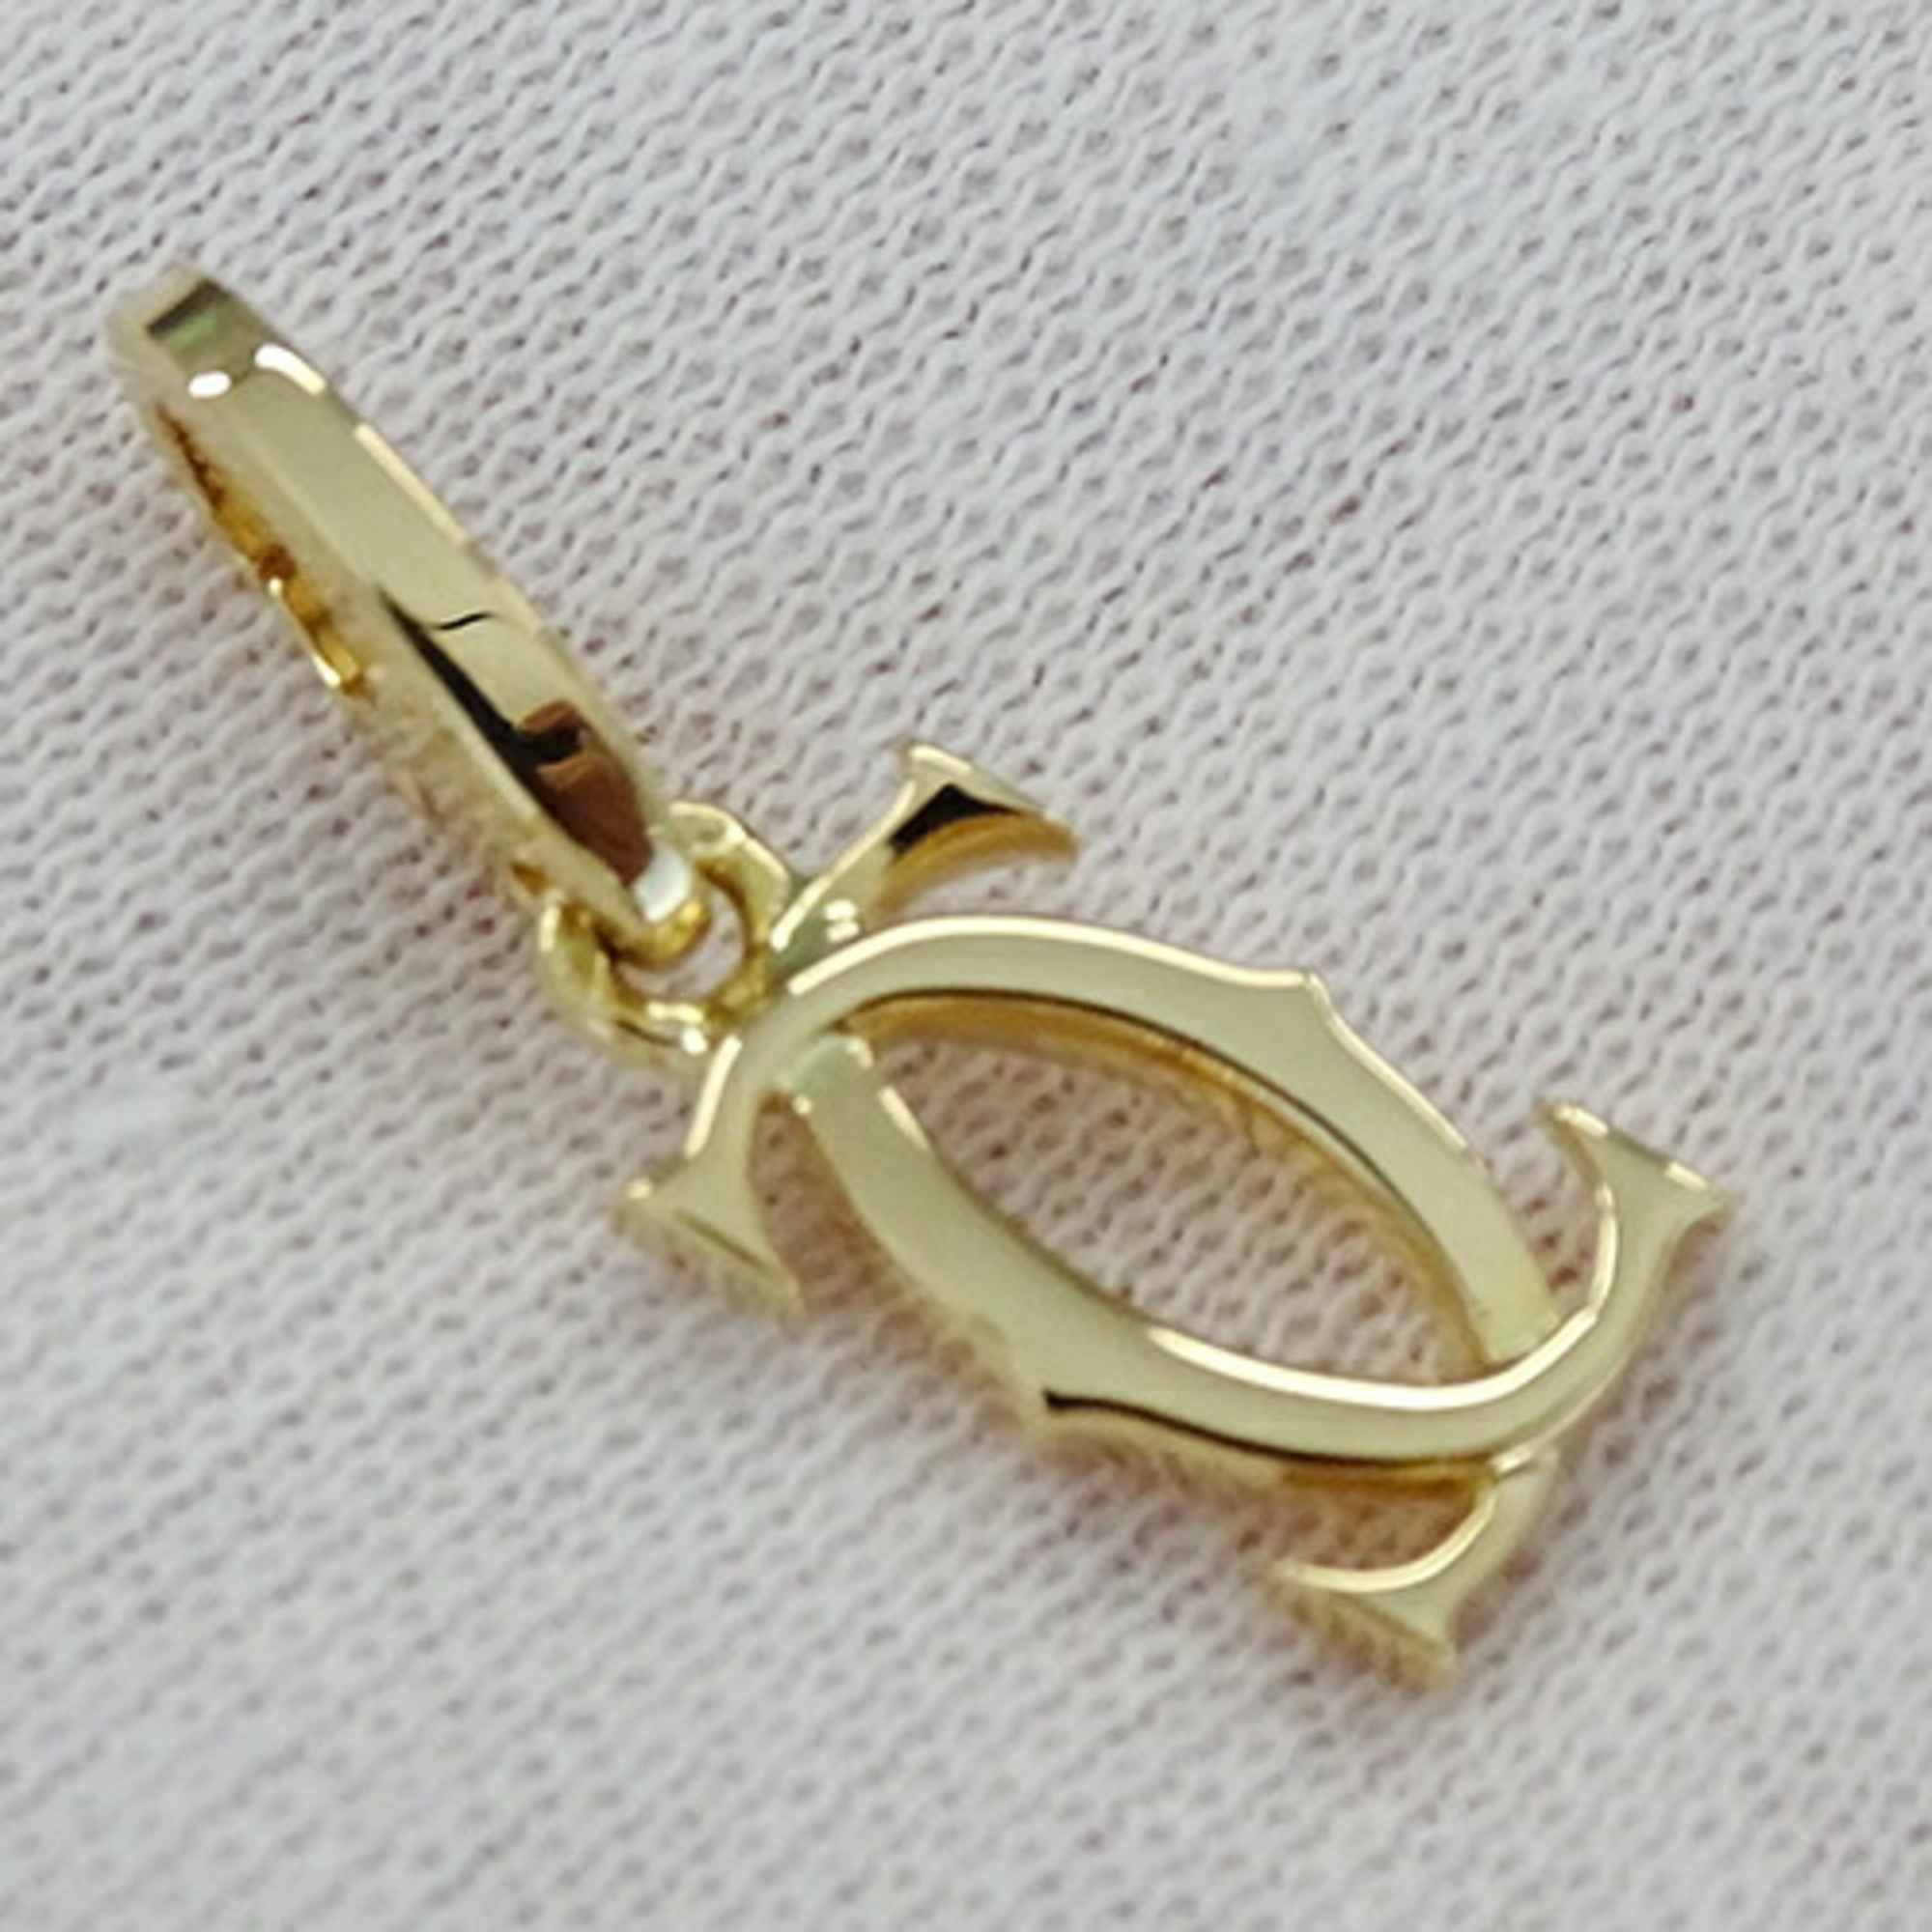 Cartier Pendant Top for Women and Men, Charm, 750YG, 2C, Yellow Gold, Polished